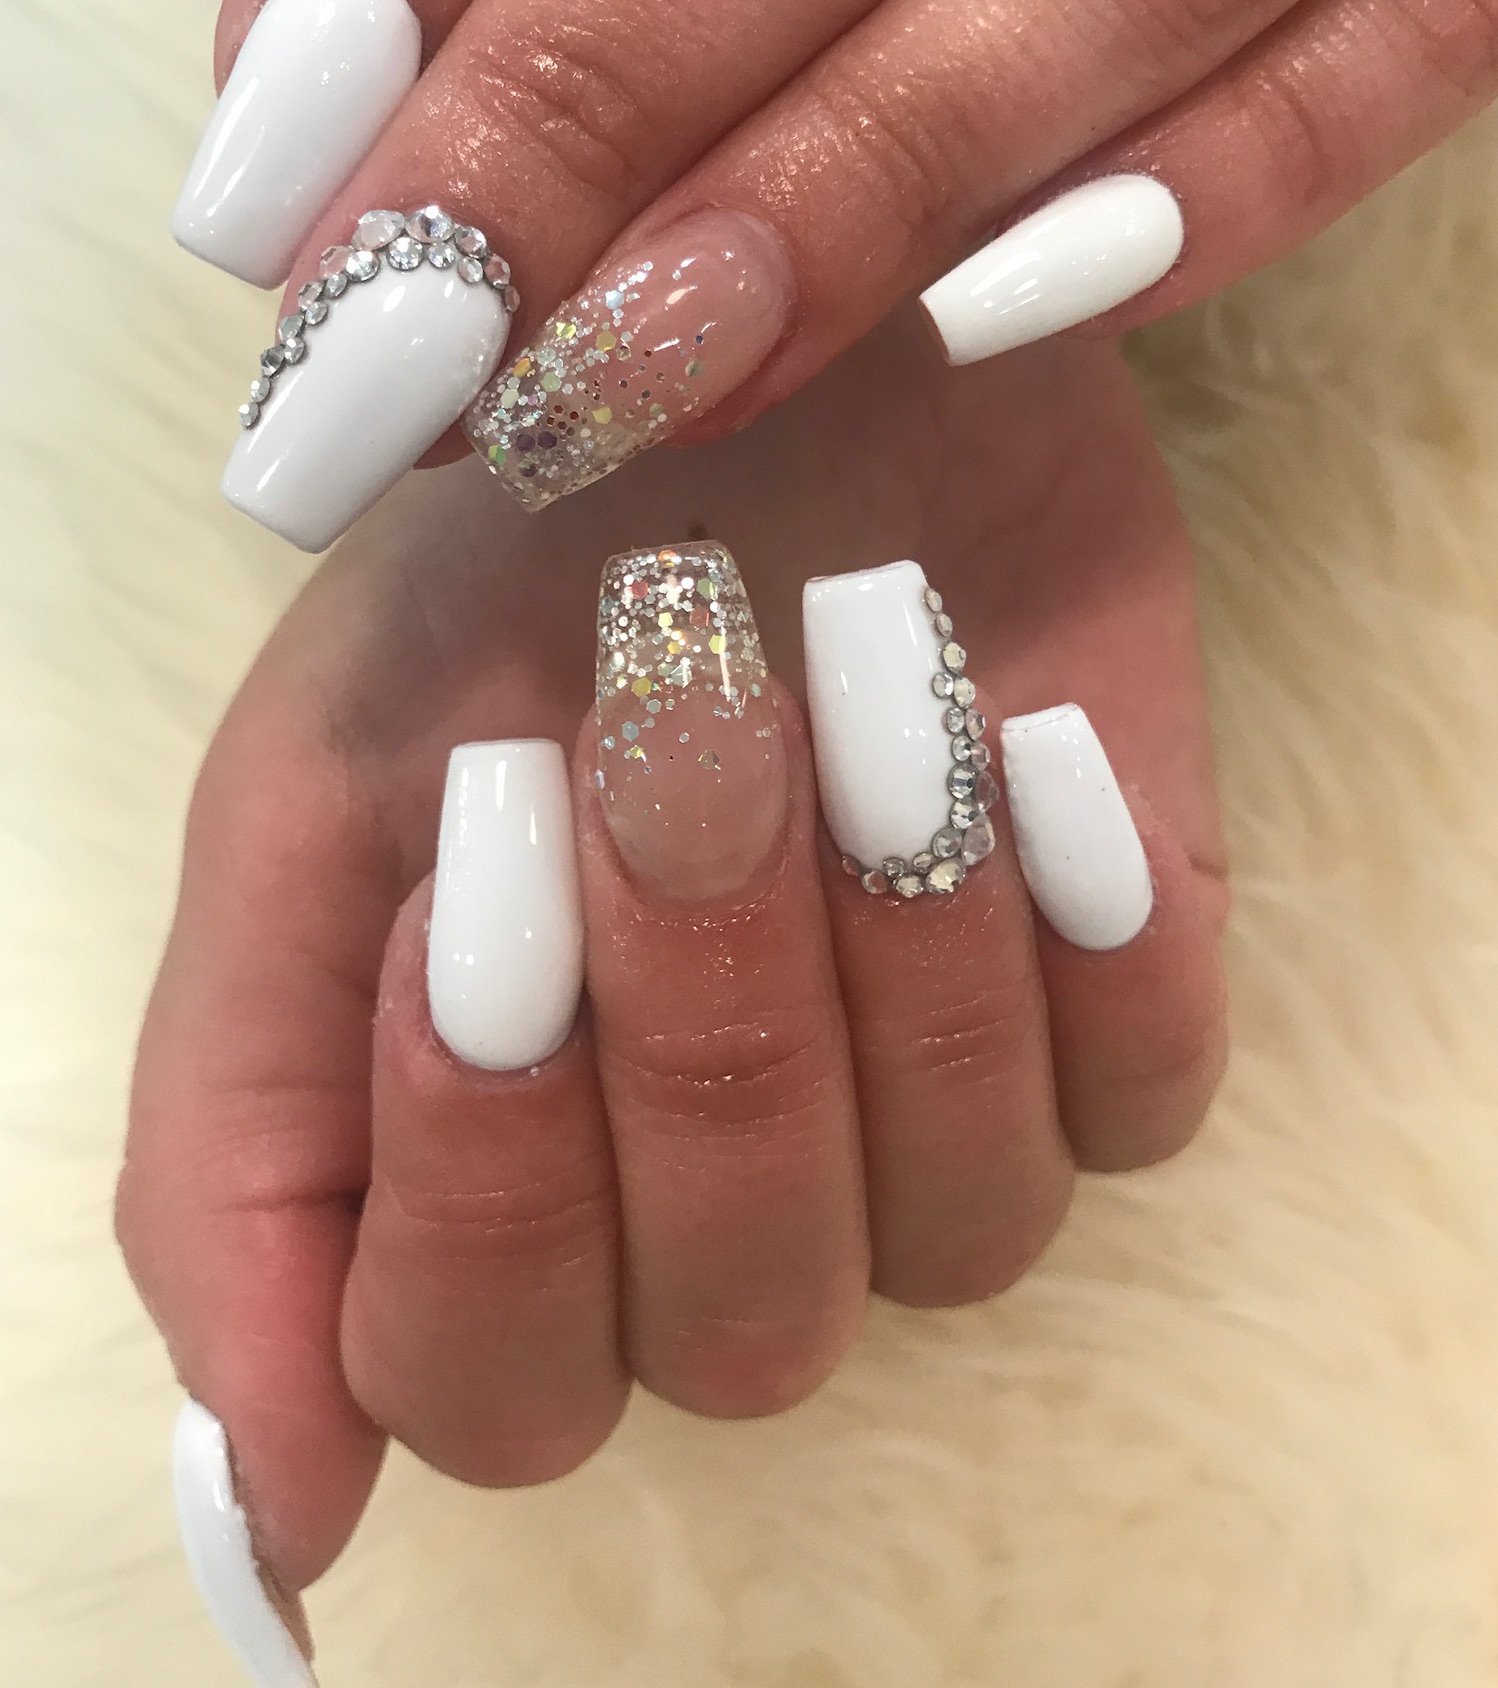 30 Glitter Nails To Bright Up The Season : Glitter & White French Tip Nails  with Snowflake